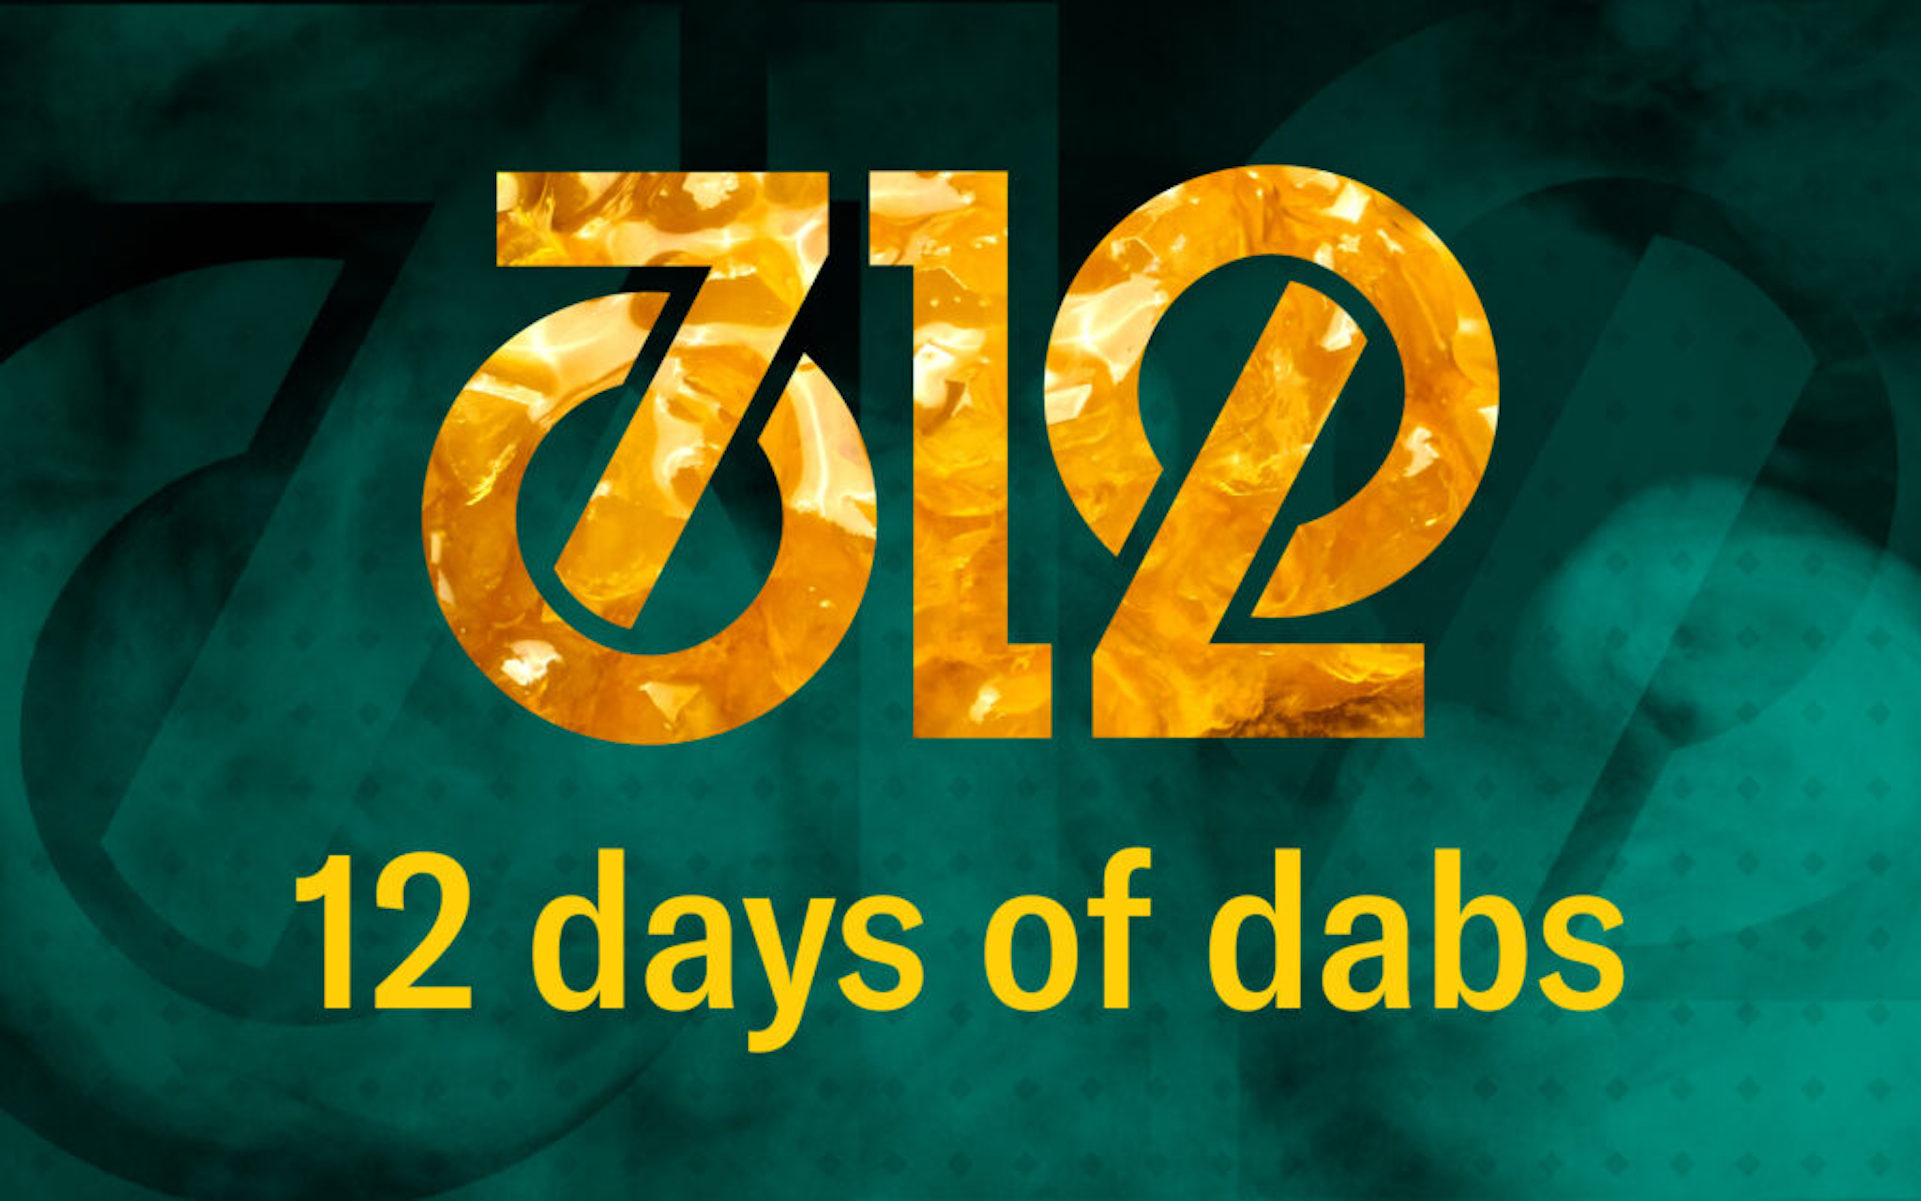 photo of Celebrate 710 with 12 days of dabs, wax, and hash image